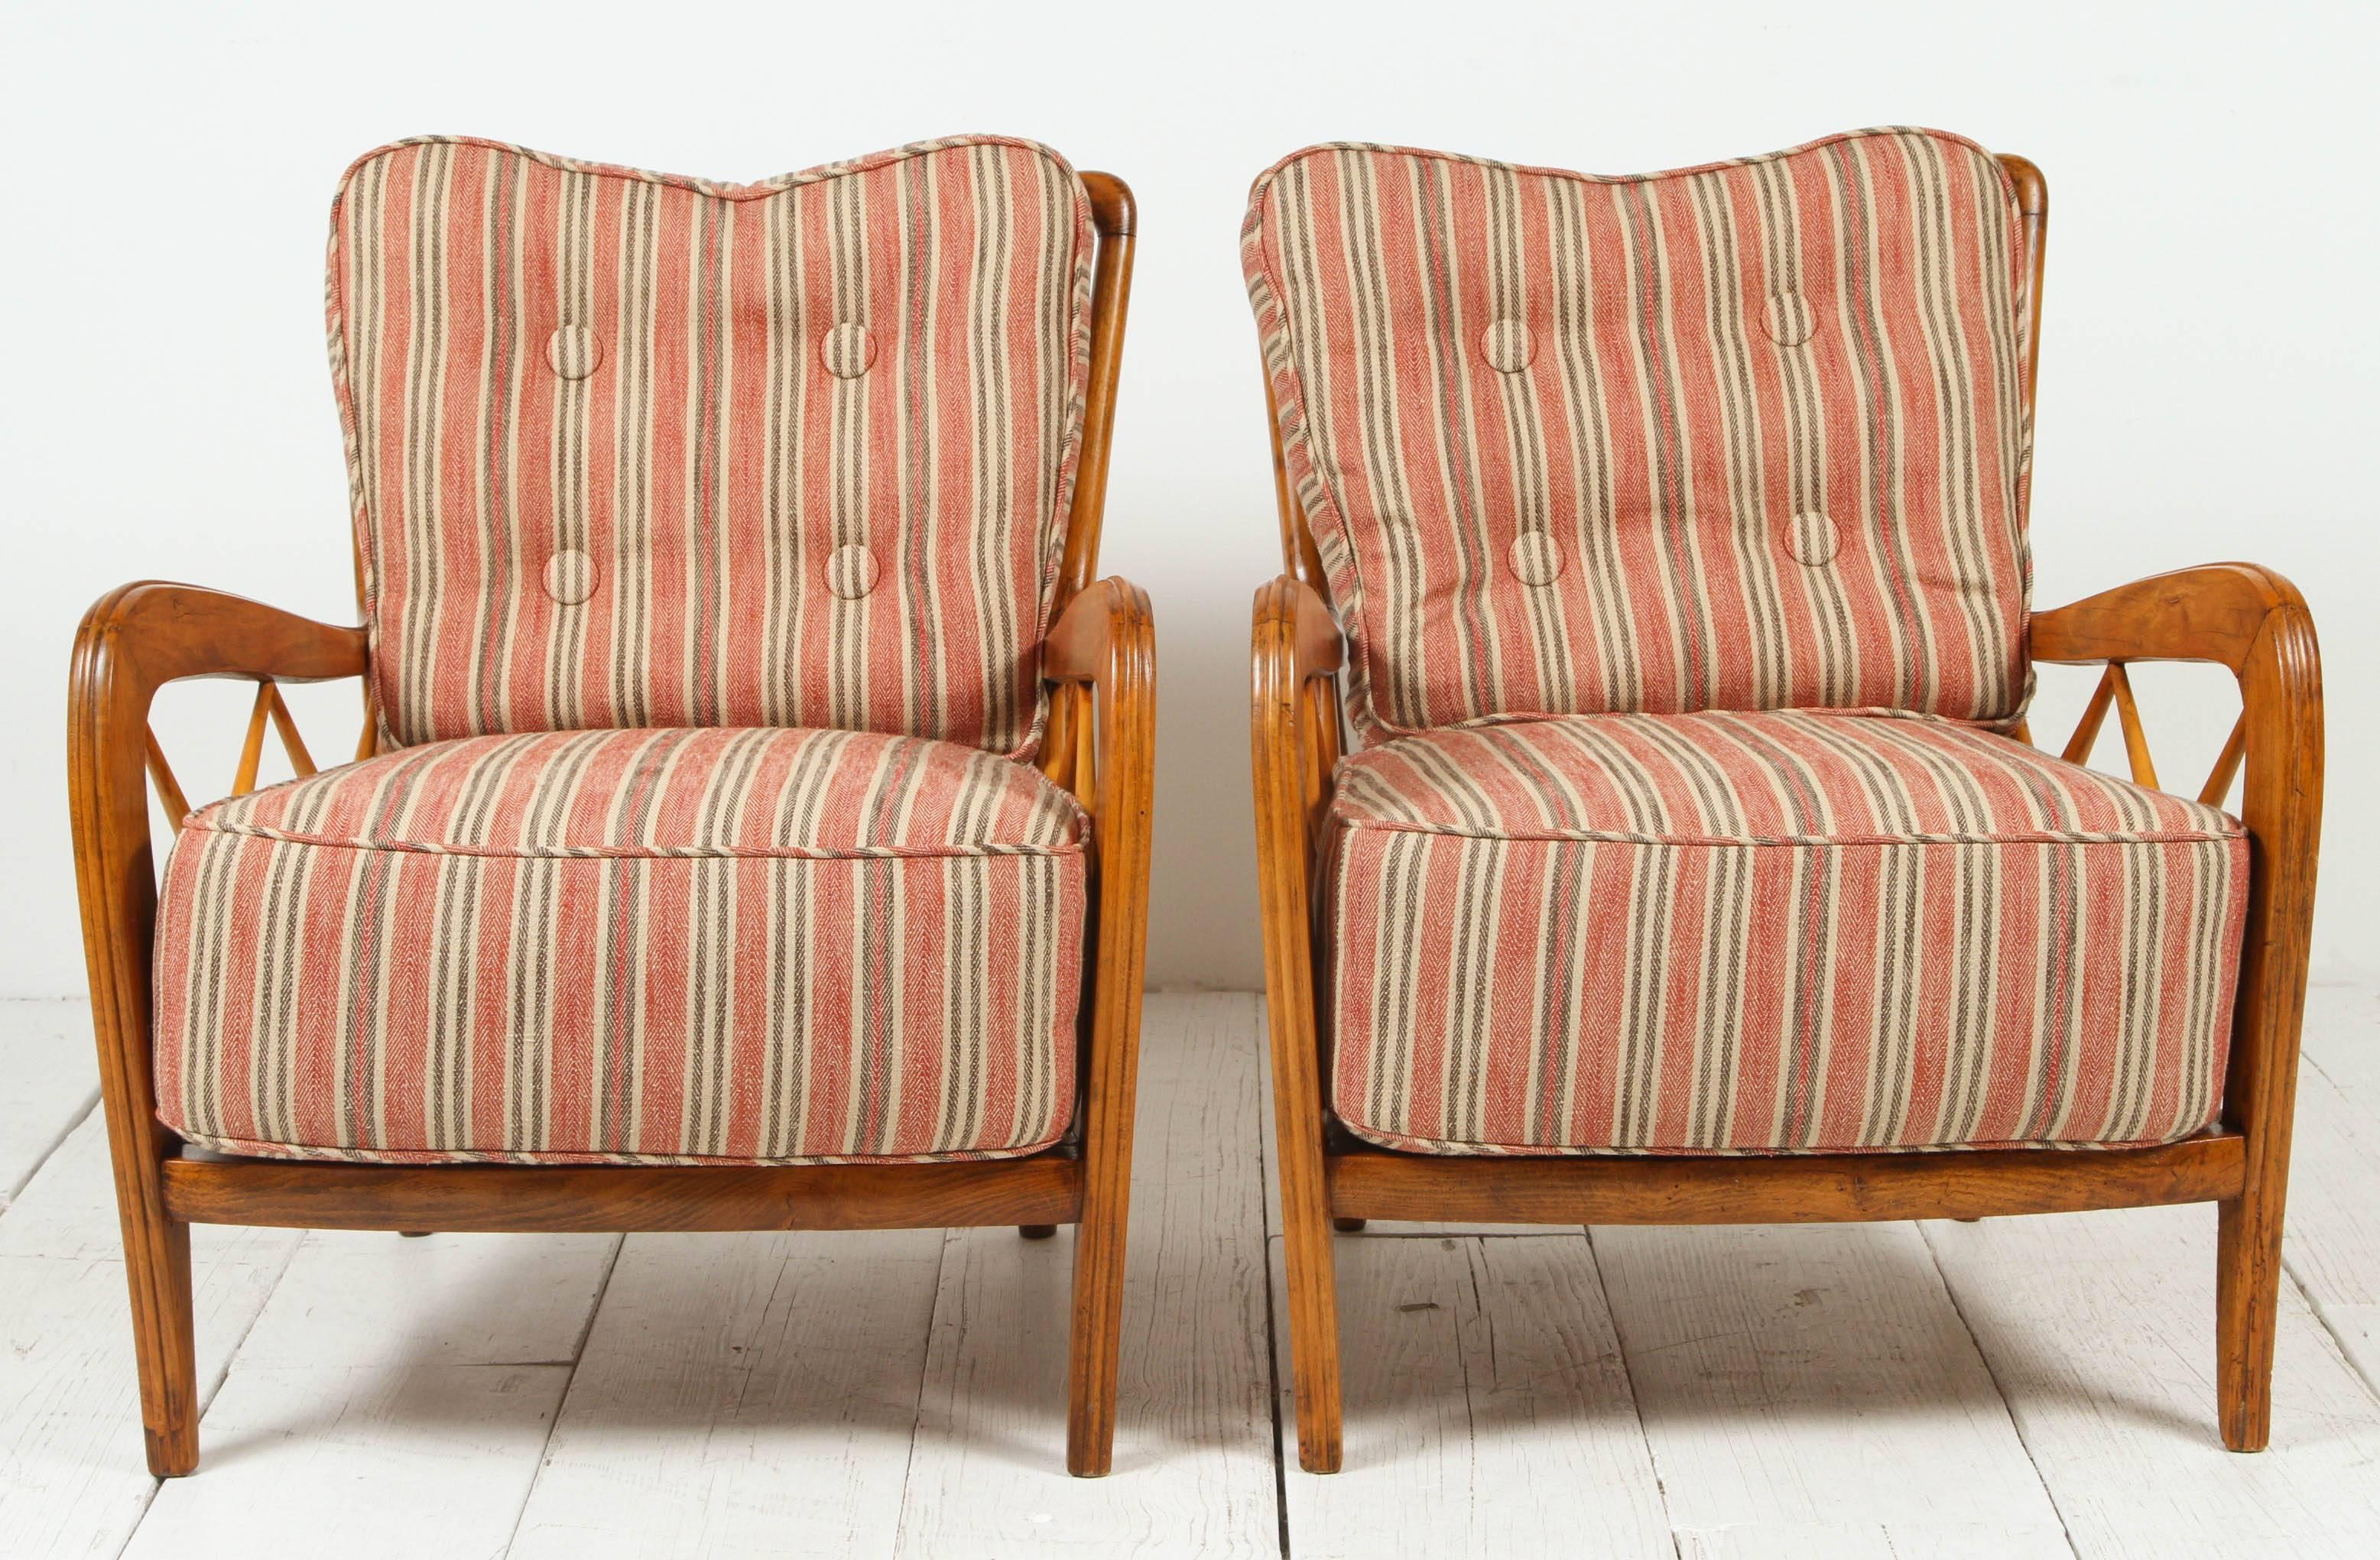 Pair of Italian open framed Gio Ponti Style spindle chairs upholstered in striped twill fabric.